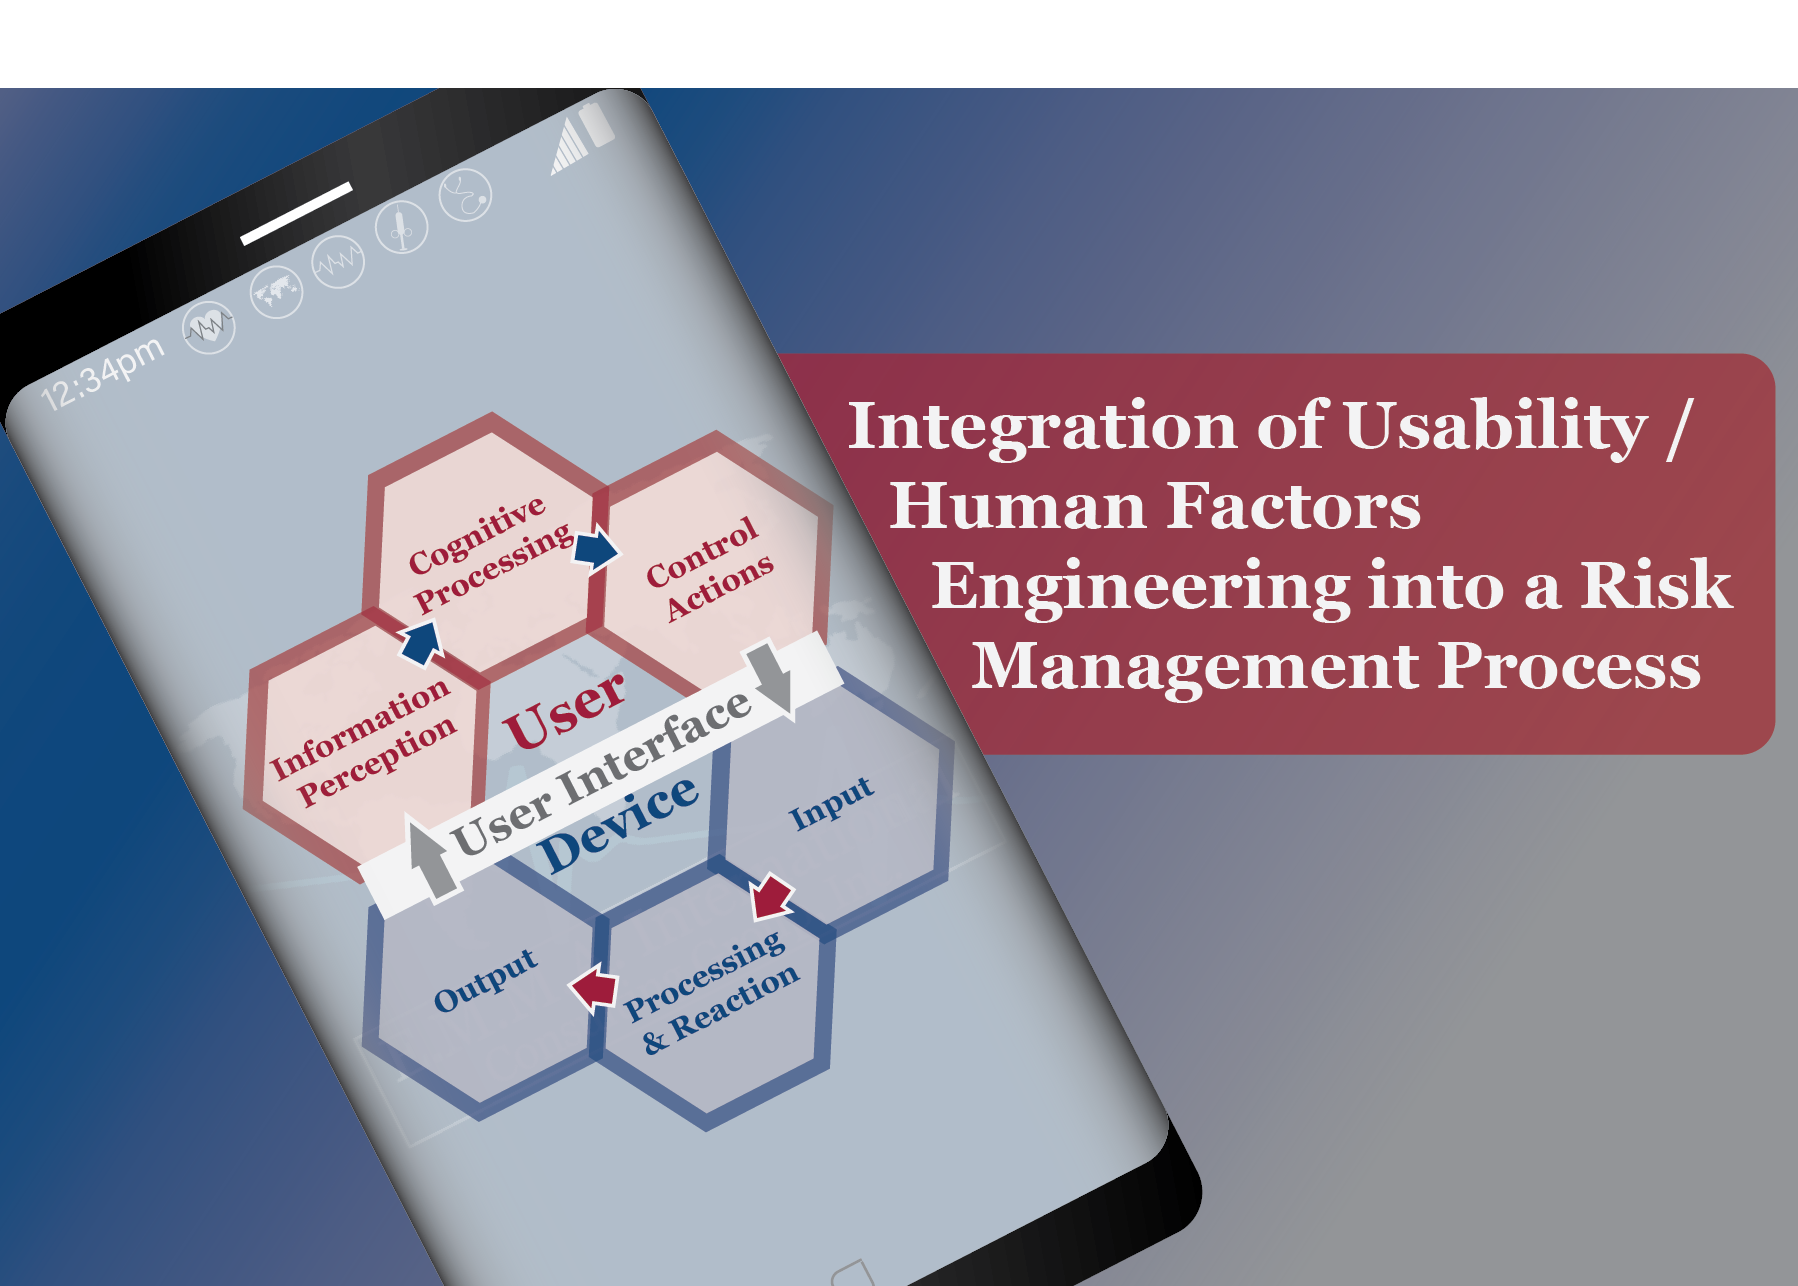 Integration of Usability / Human Factors Engineering into a Risk Management Process